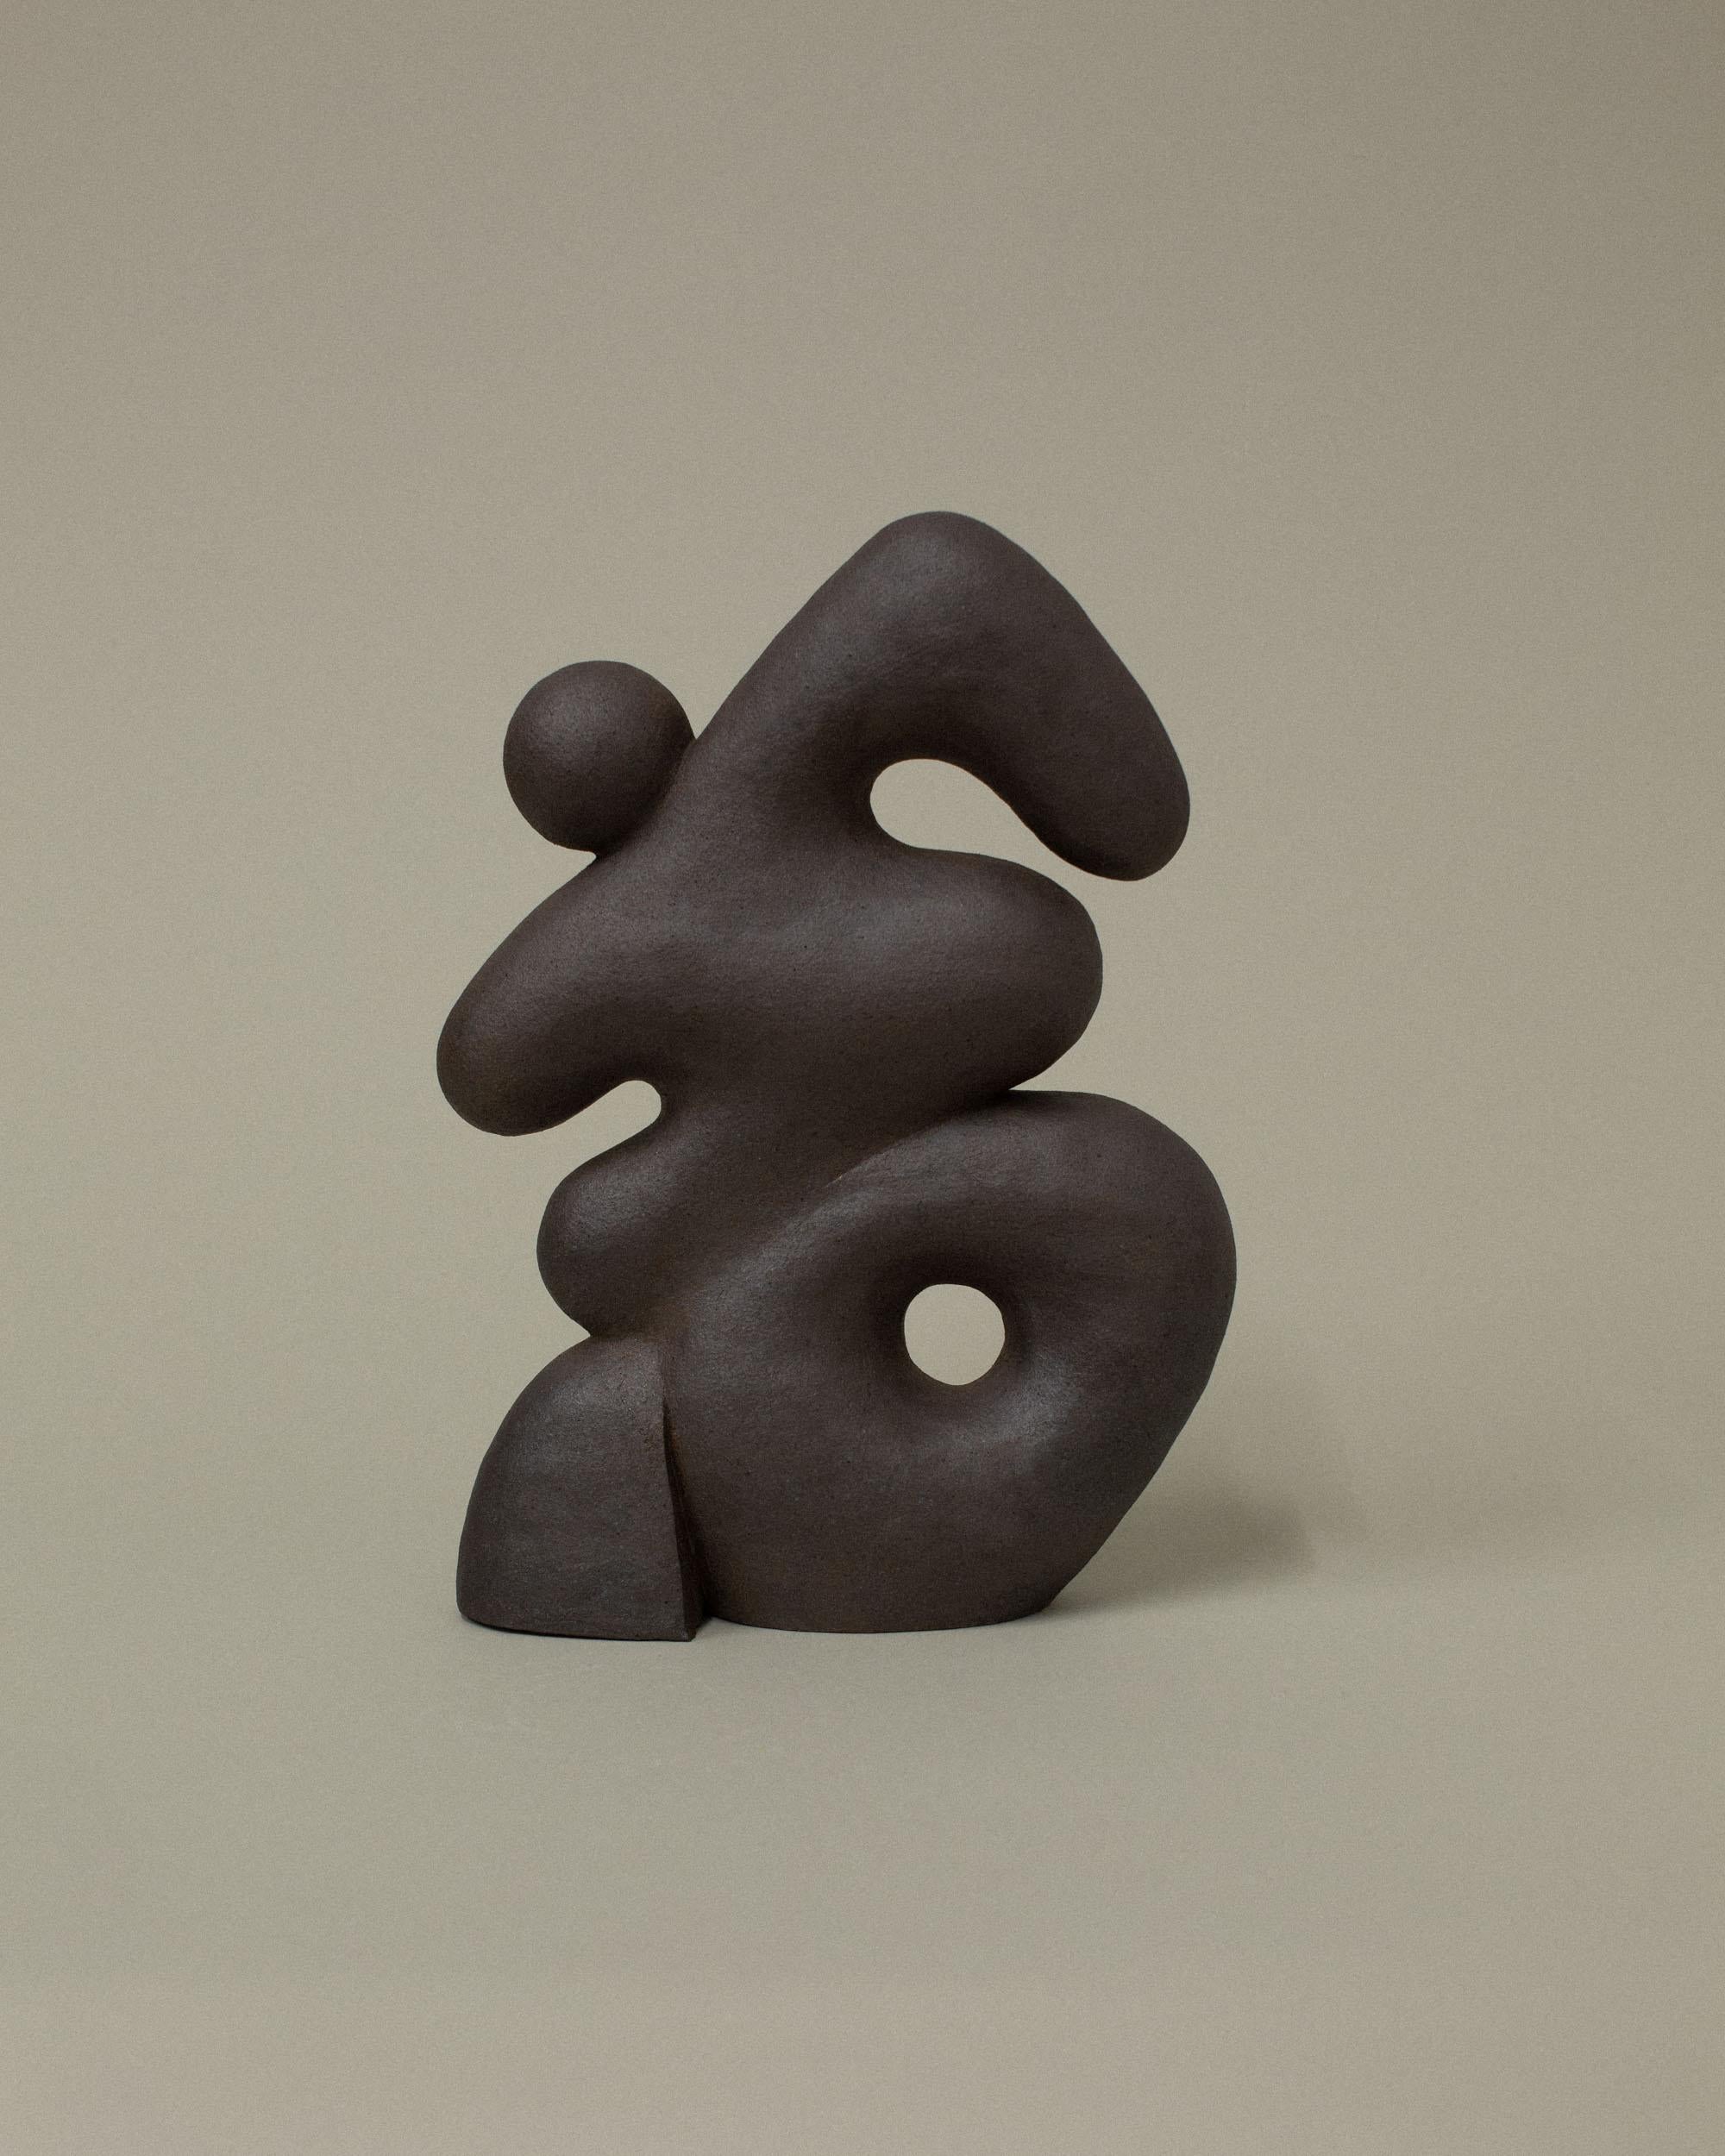 Dark Brown Hermes Sculpture by Common Body
Dimensions: W 23 x D 9 x H 32 cm
Materials: Dark Brown Stoneware

Common body is a sculpture and interior object studio founded by nathaniel kyung smith, an artist whose passion lies in the intersection of